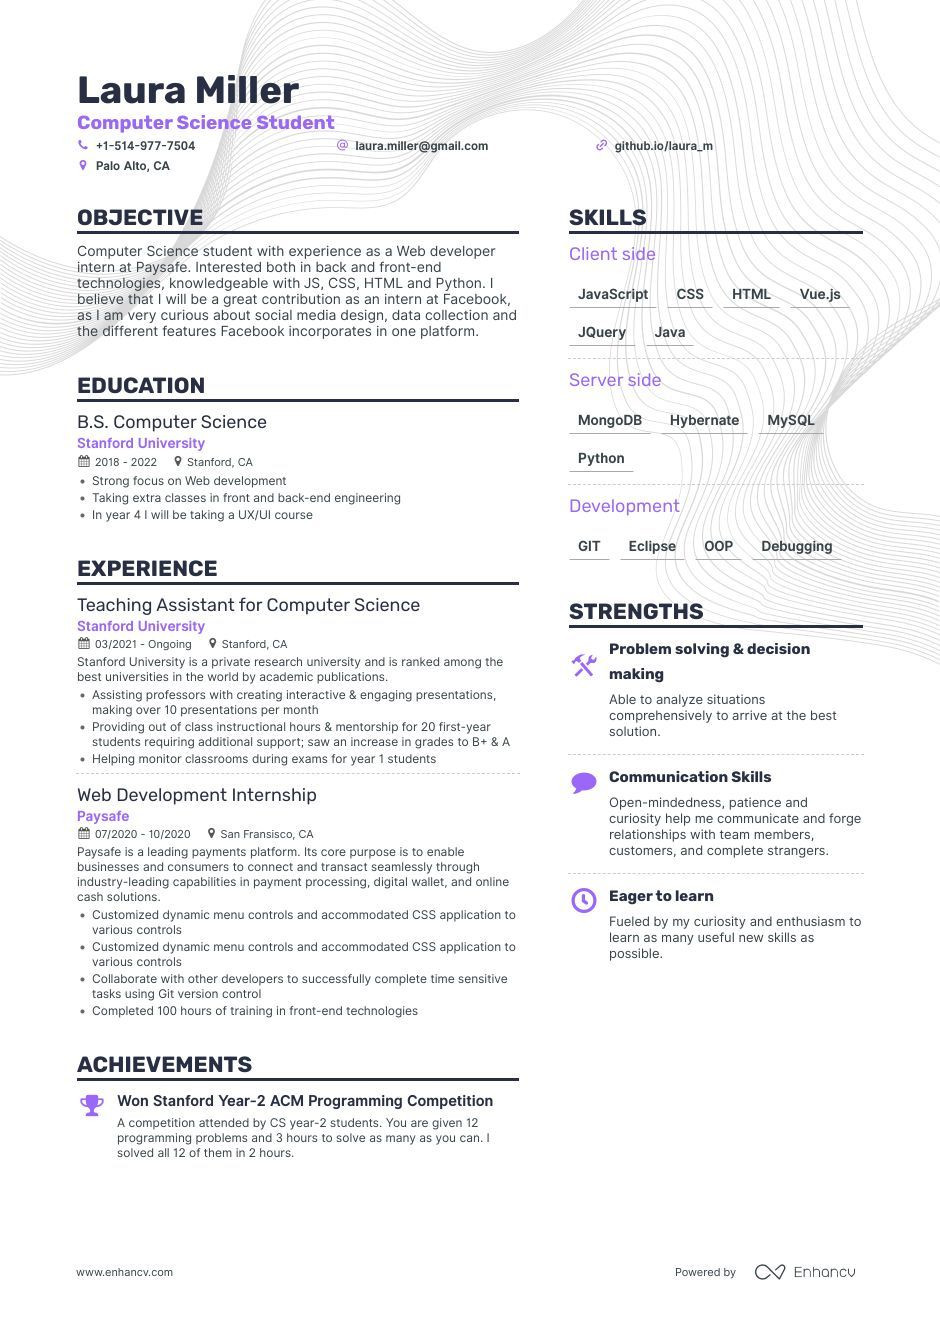 Describe Your Computer Skills Pc and Mac Resume Sample Computer Science Resume Examples & Guide for 2022 (layout, Skills …